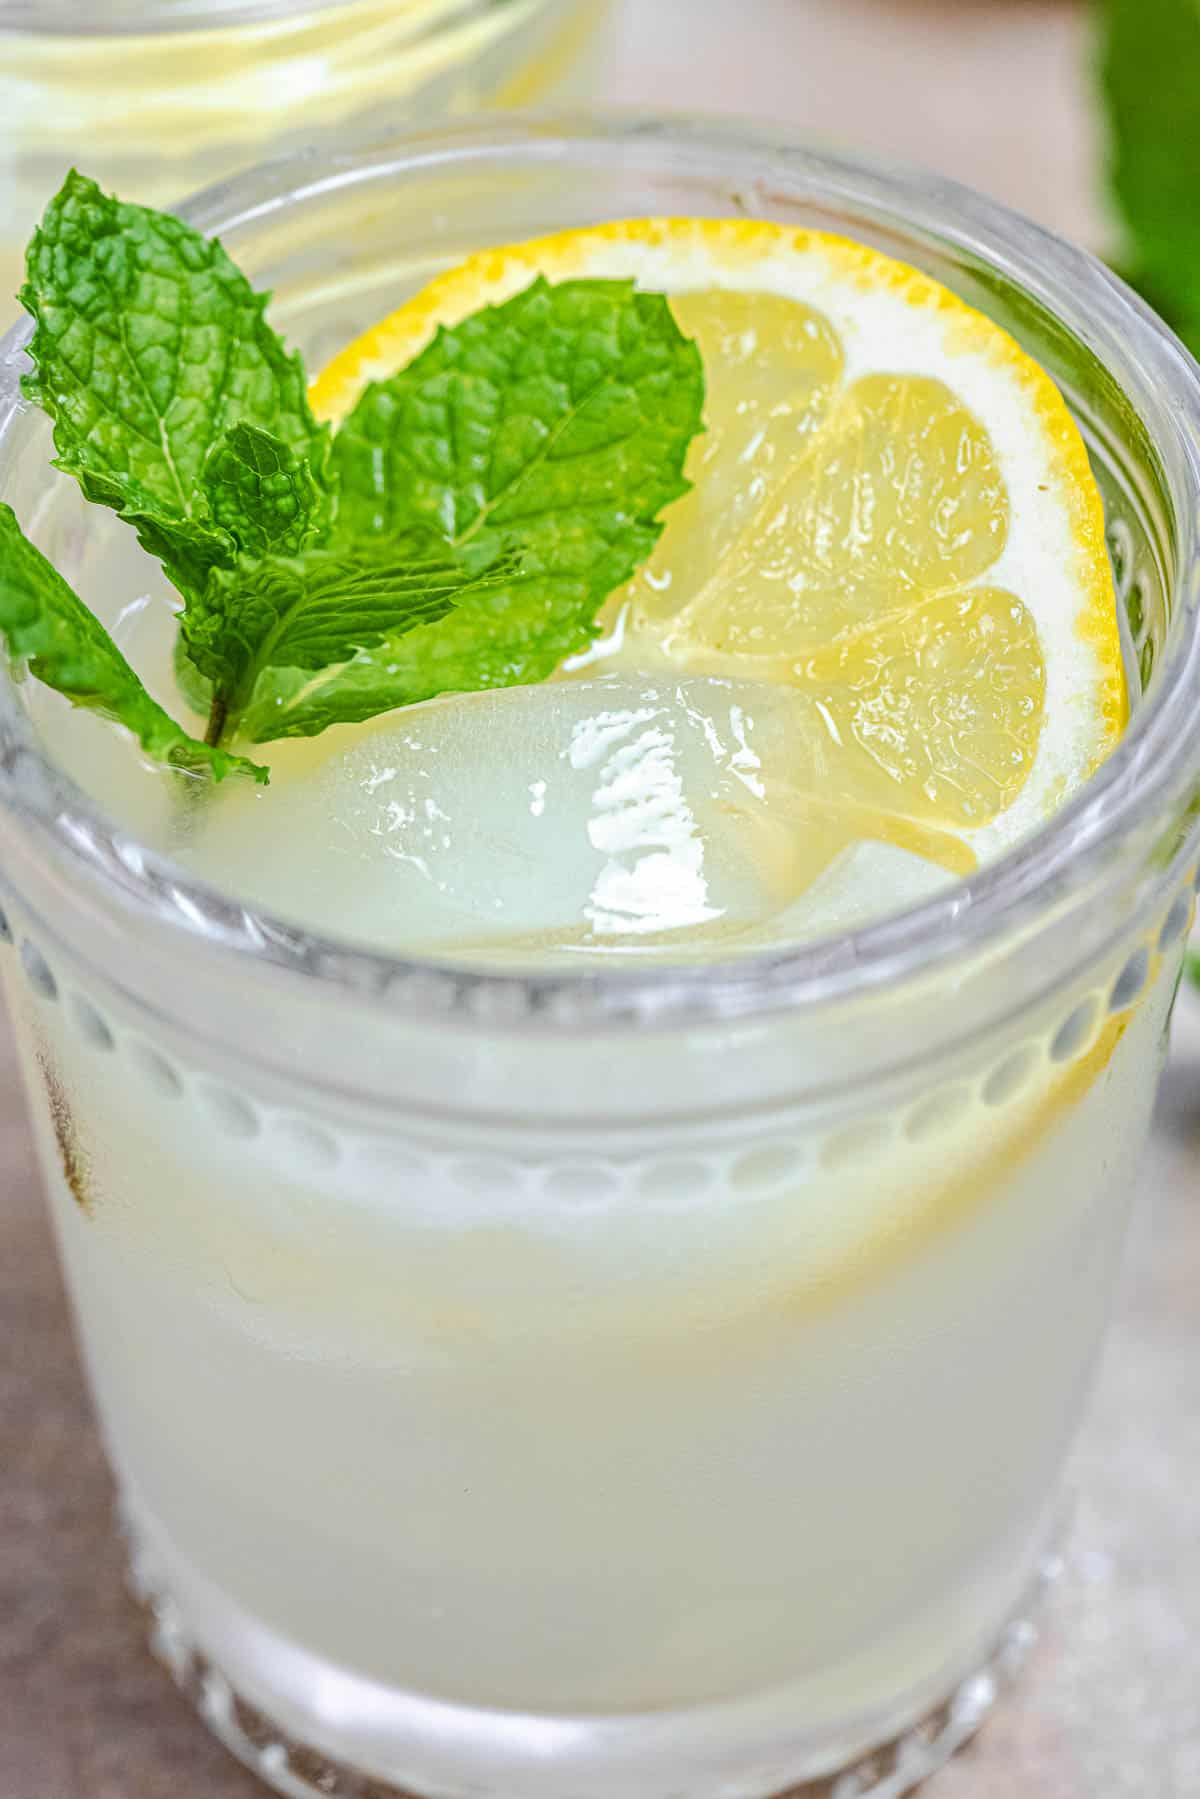 Easy Ouzo Dish Mediterranean Drink Lemon with The 